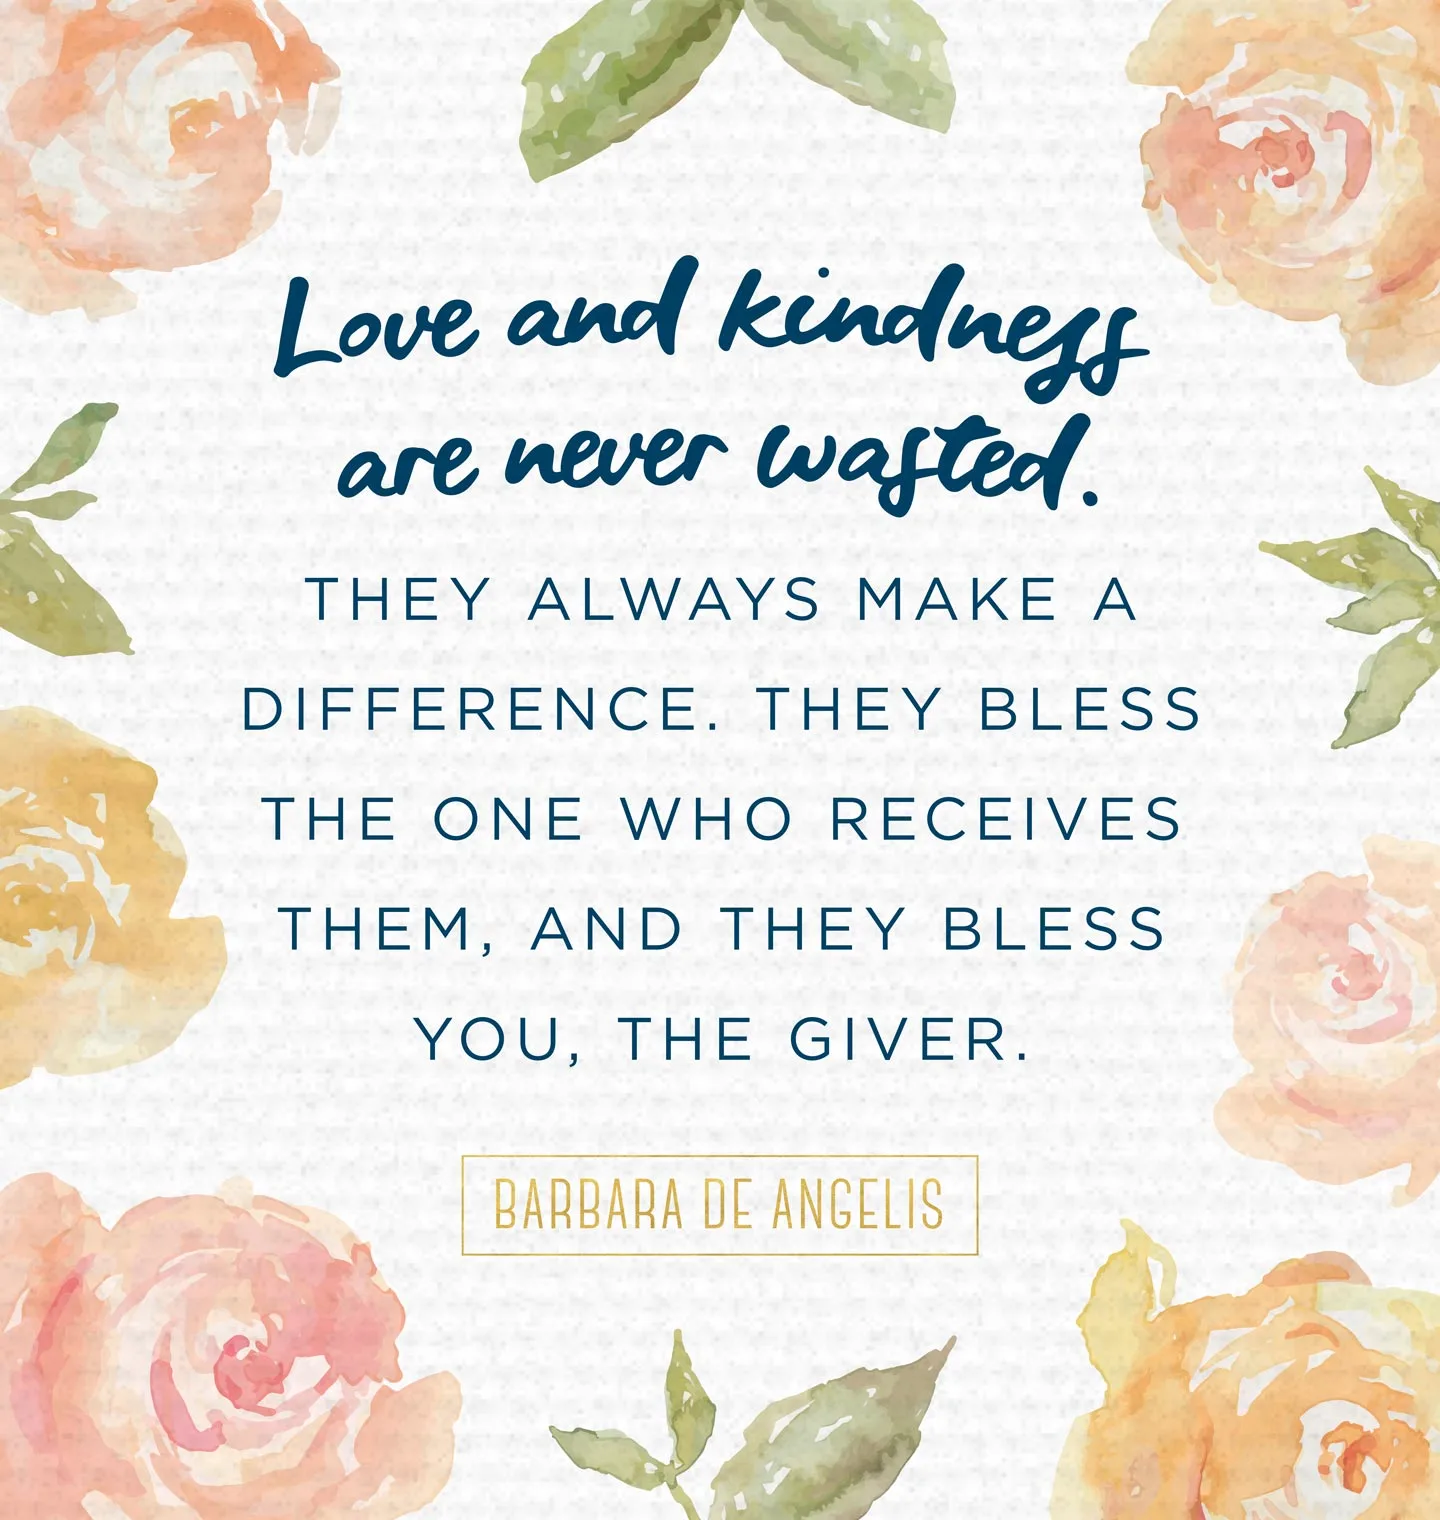 30 Inspiring Kindness Quotes That Will Enlighten You